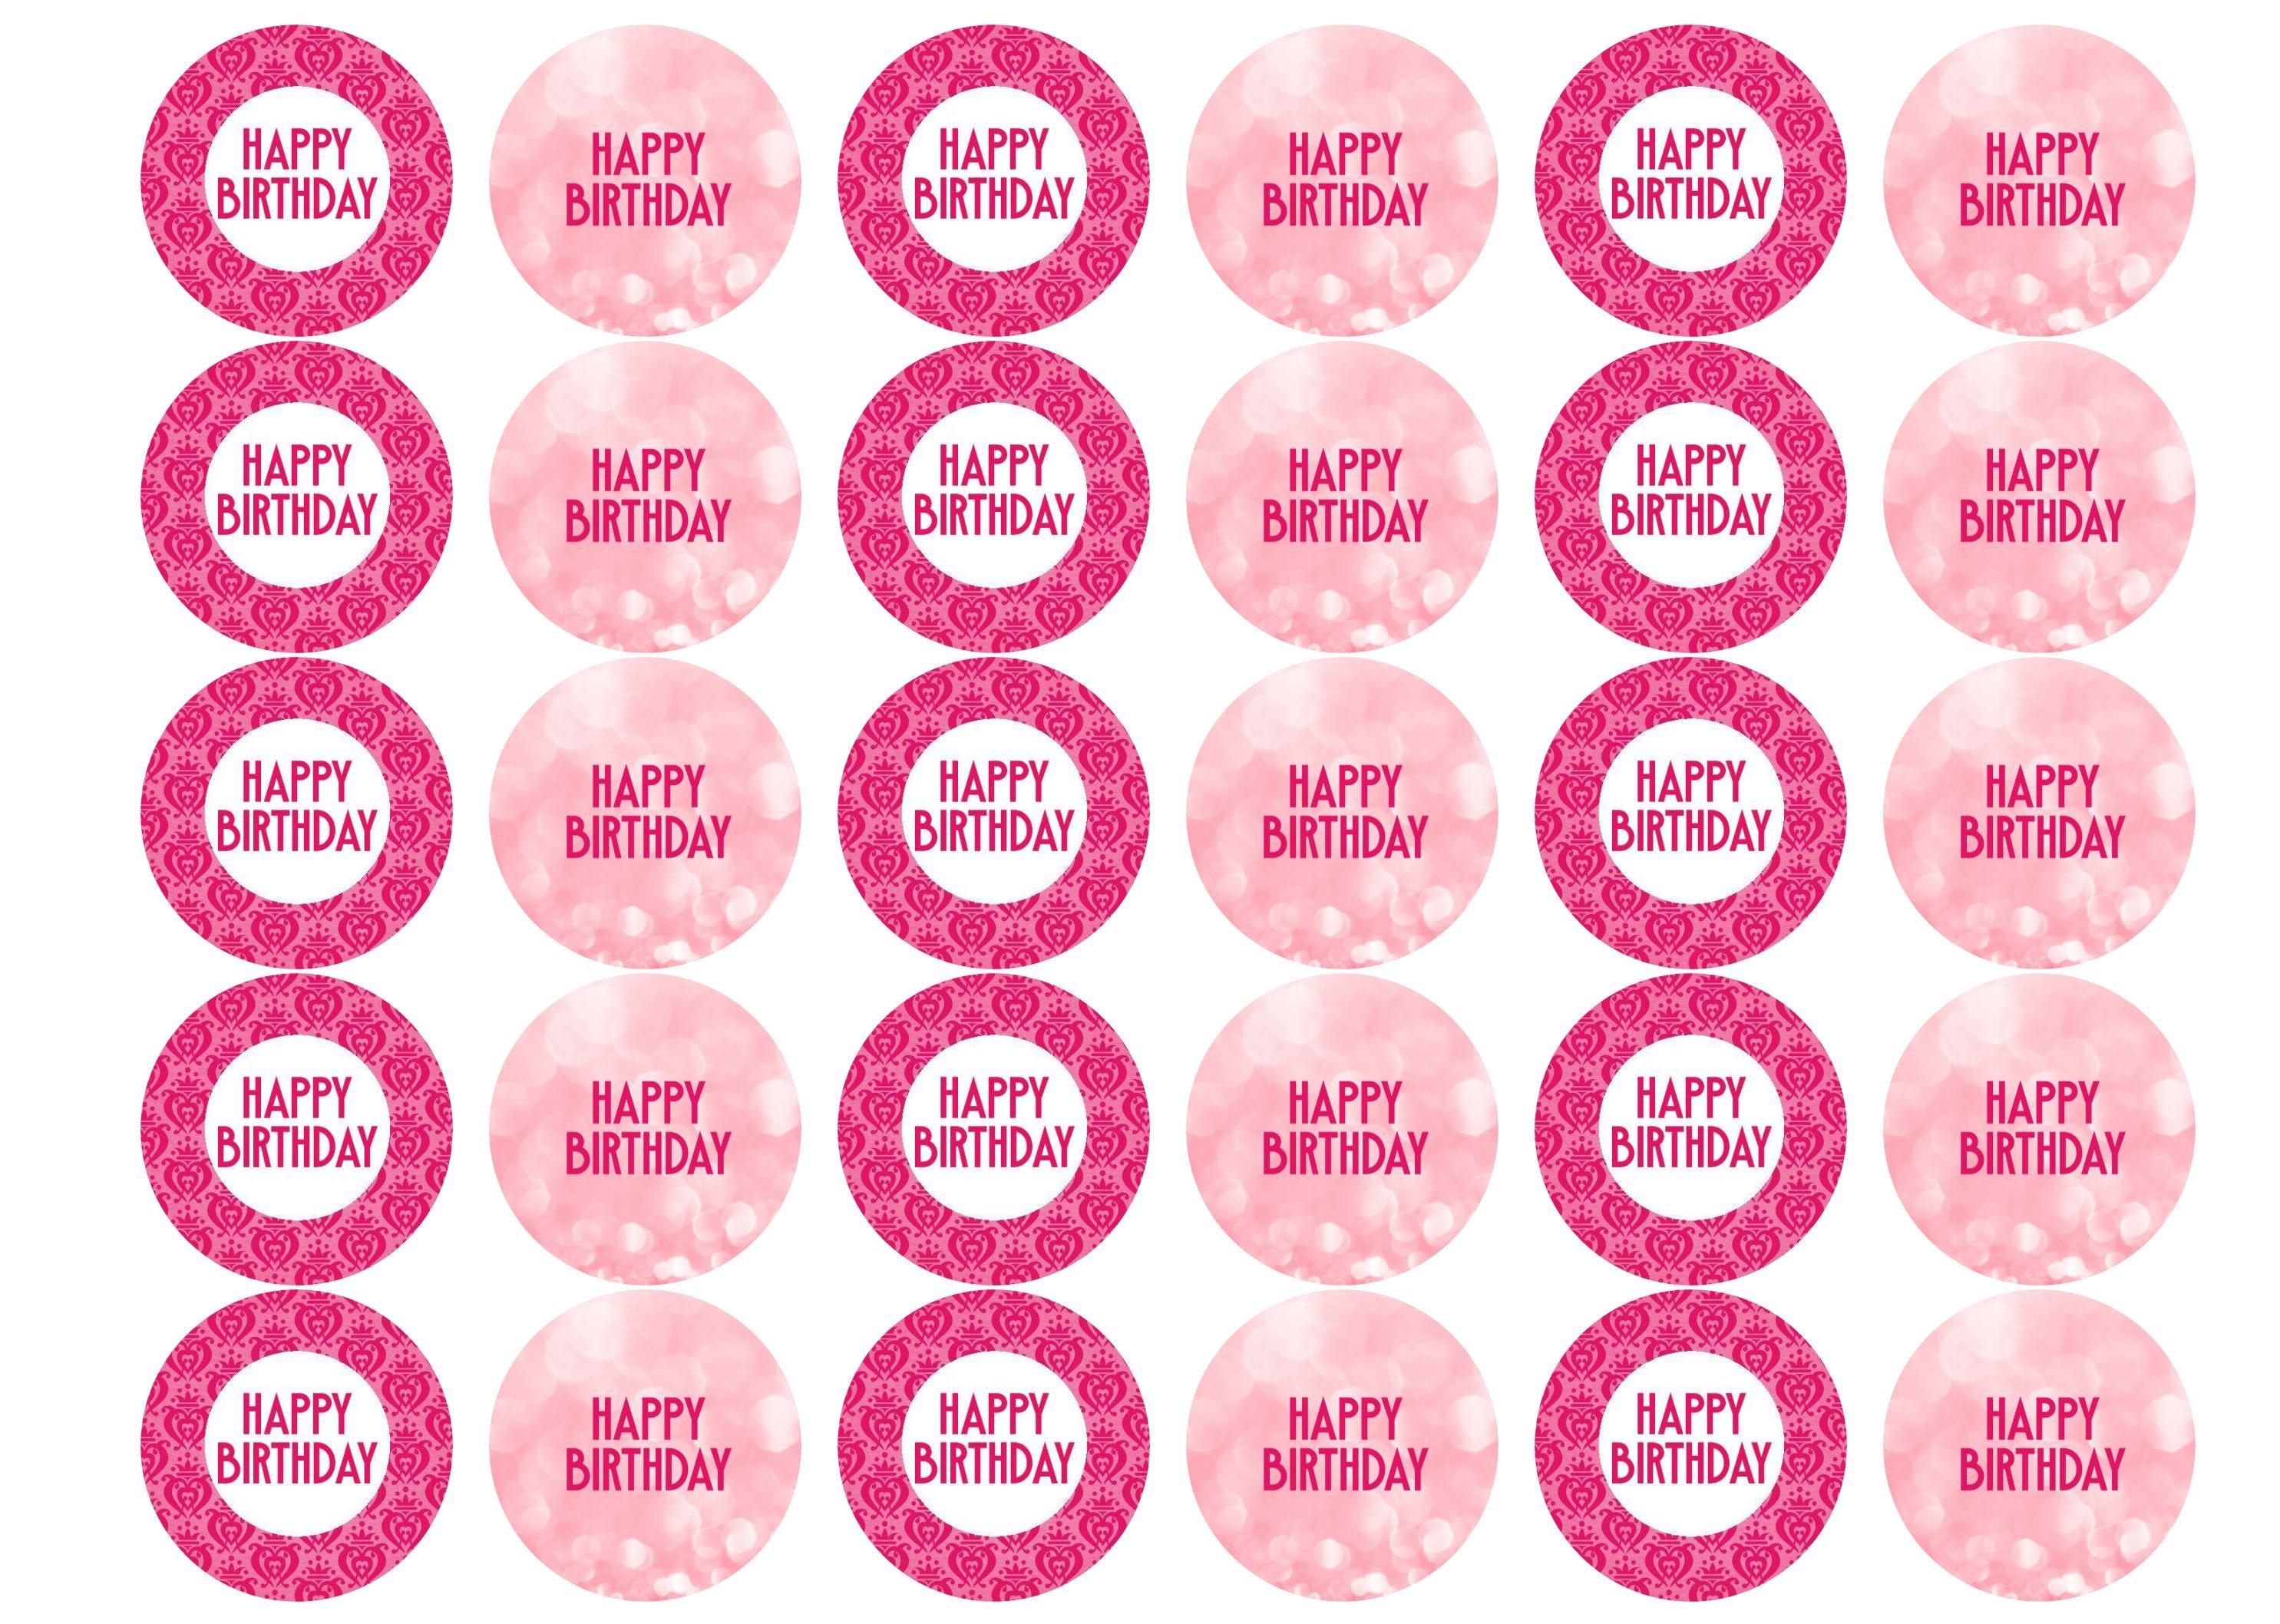 Pink Happy Birthday edible cake toppers